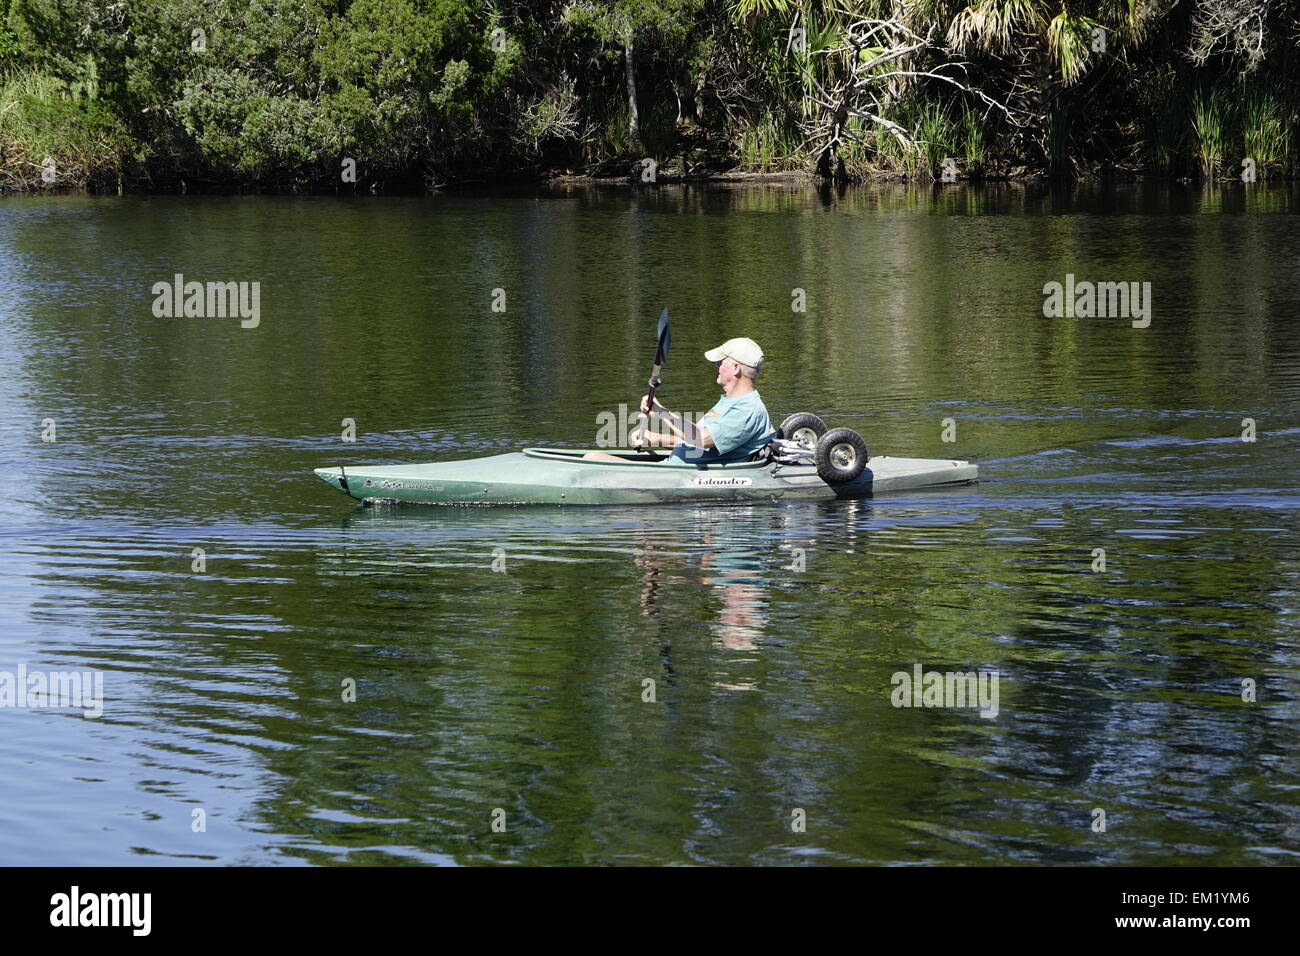 Man paddling Florida river with kayak carrier on board Stock Photo